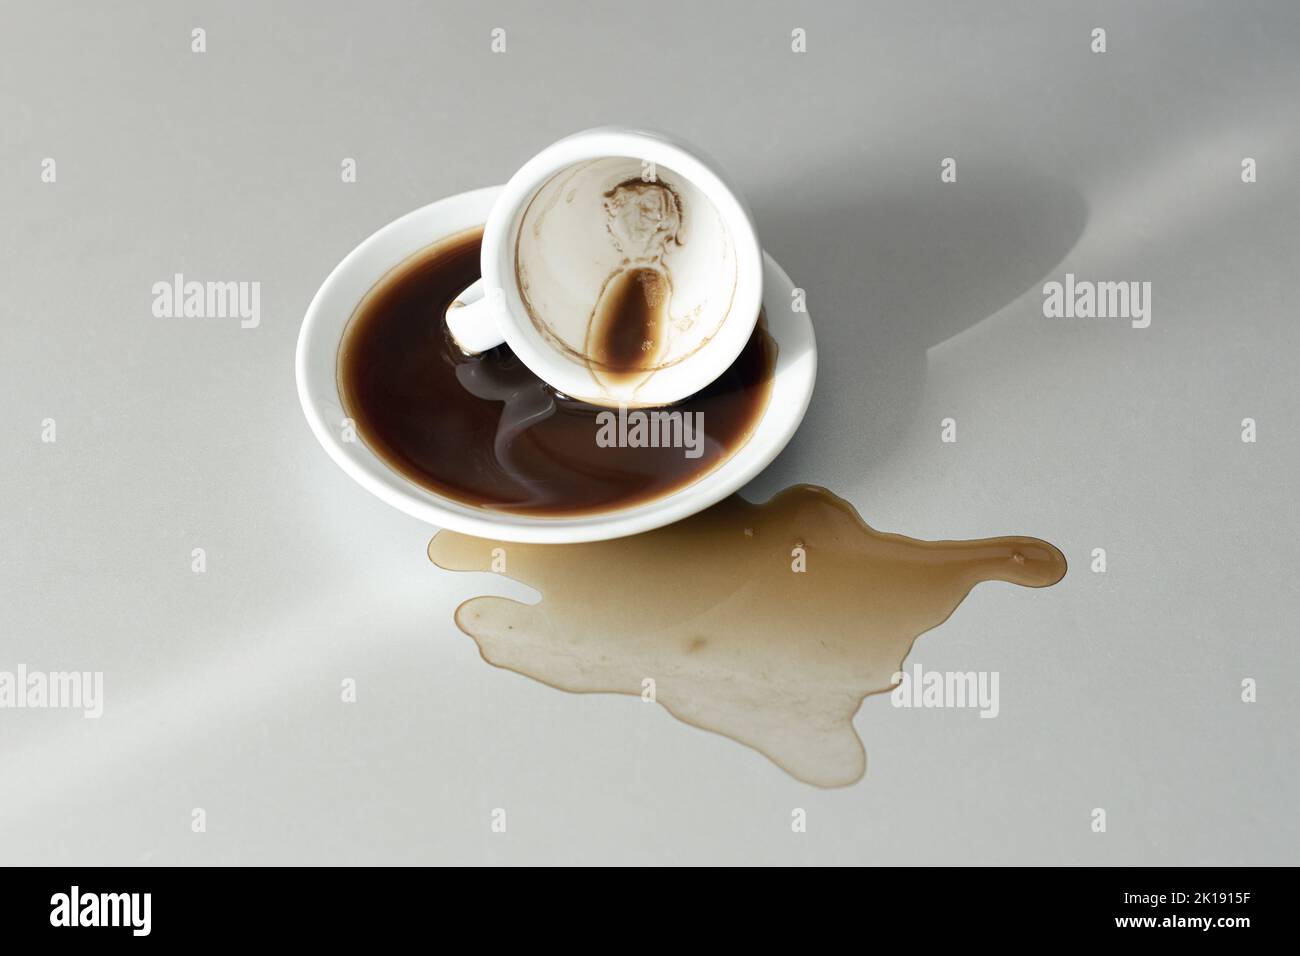 Spilled coffee on gray table. White coffee cup lying down Stock Photo